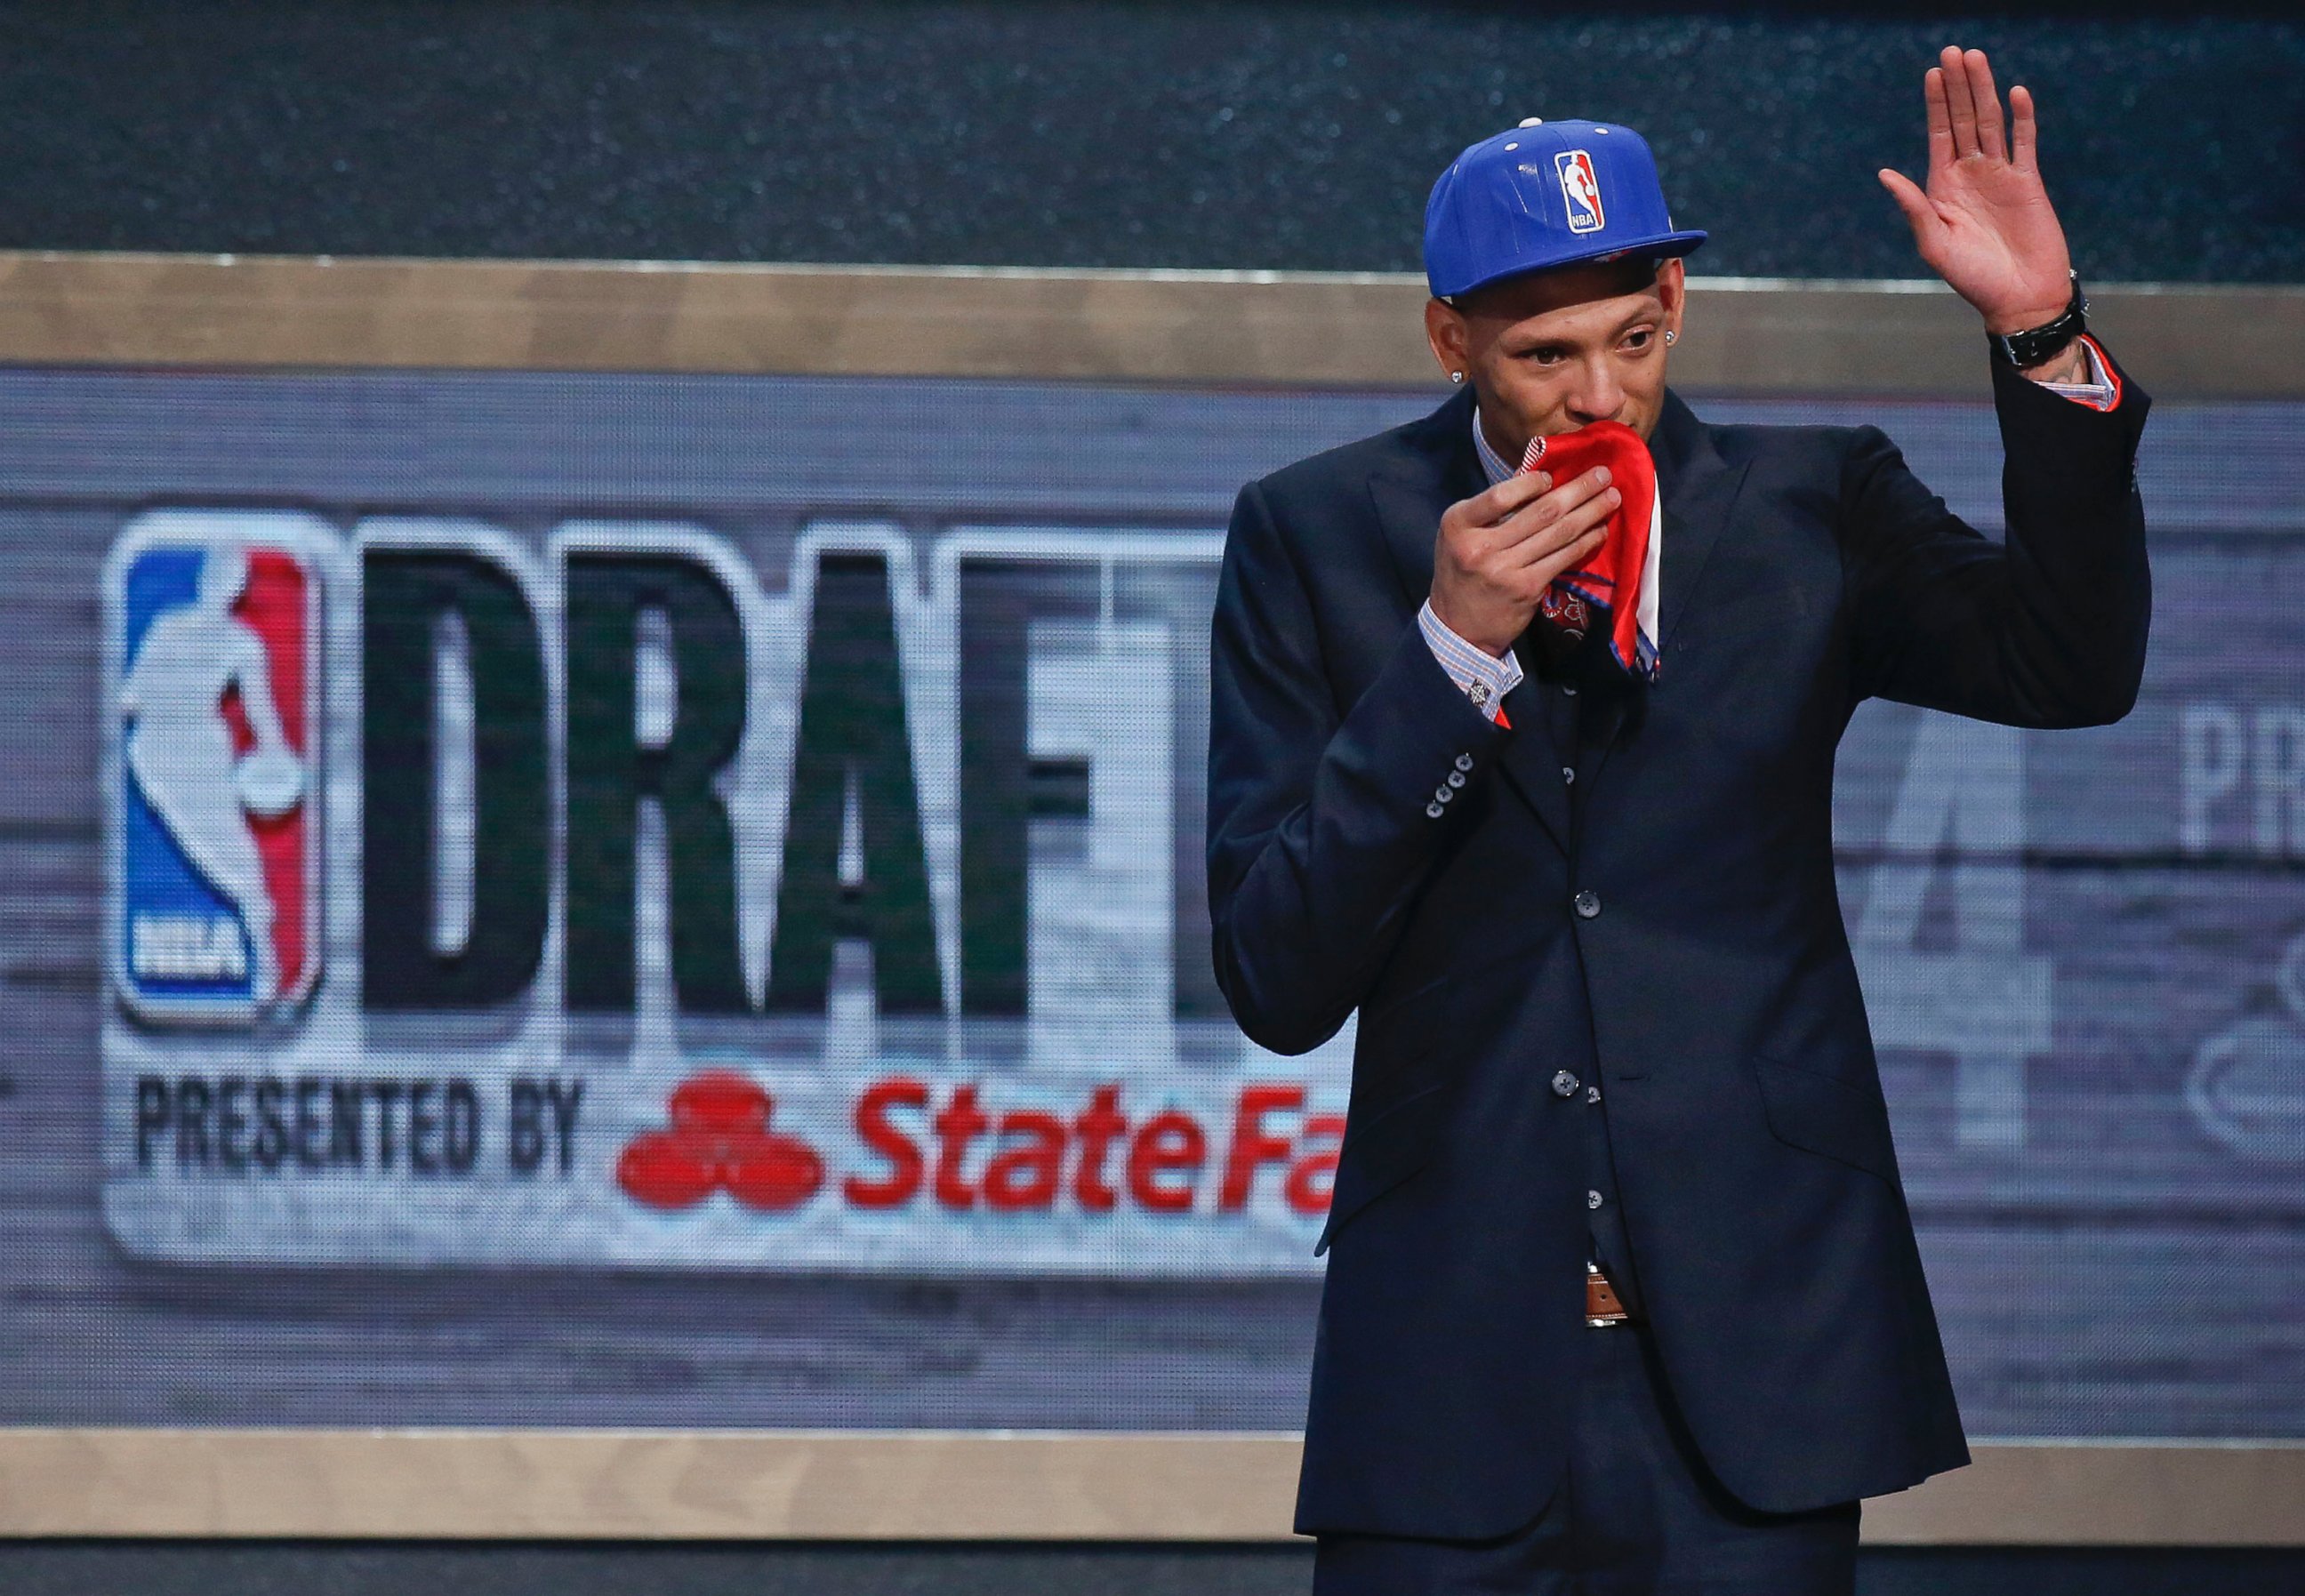 PHOTO: Baylor center Isaiah Austin waves to the crowd after being granted a ceremonial first round pick during the 2014 NBA Draft, June 26, 2014, in New York.